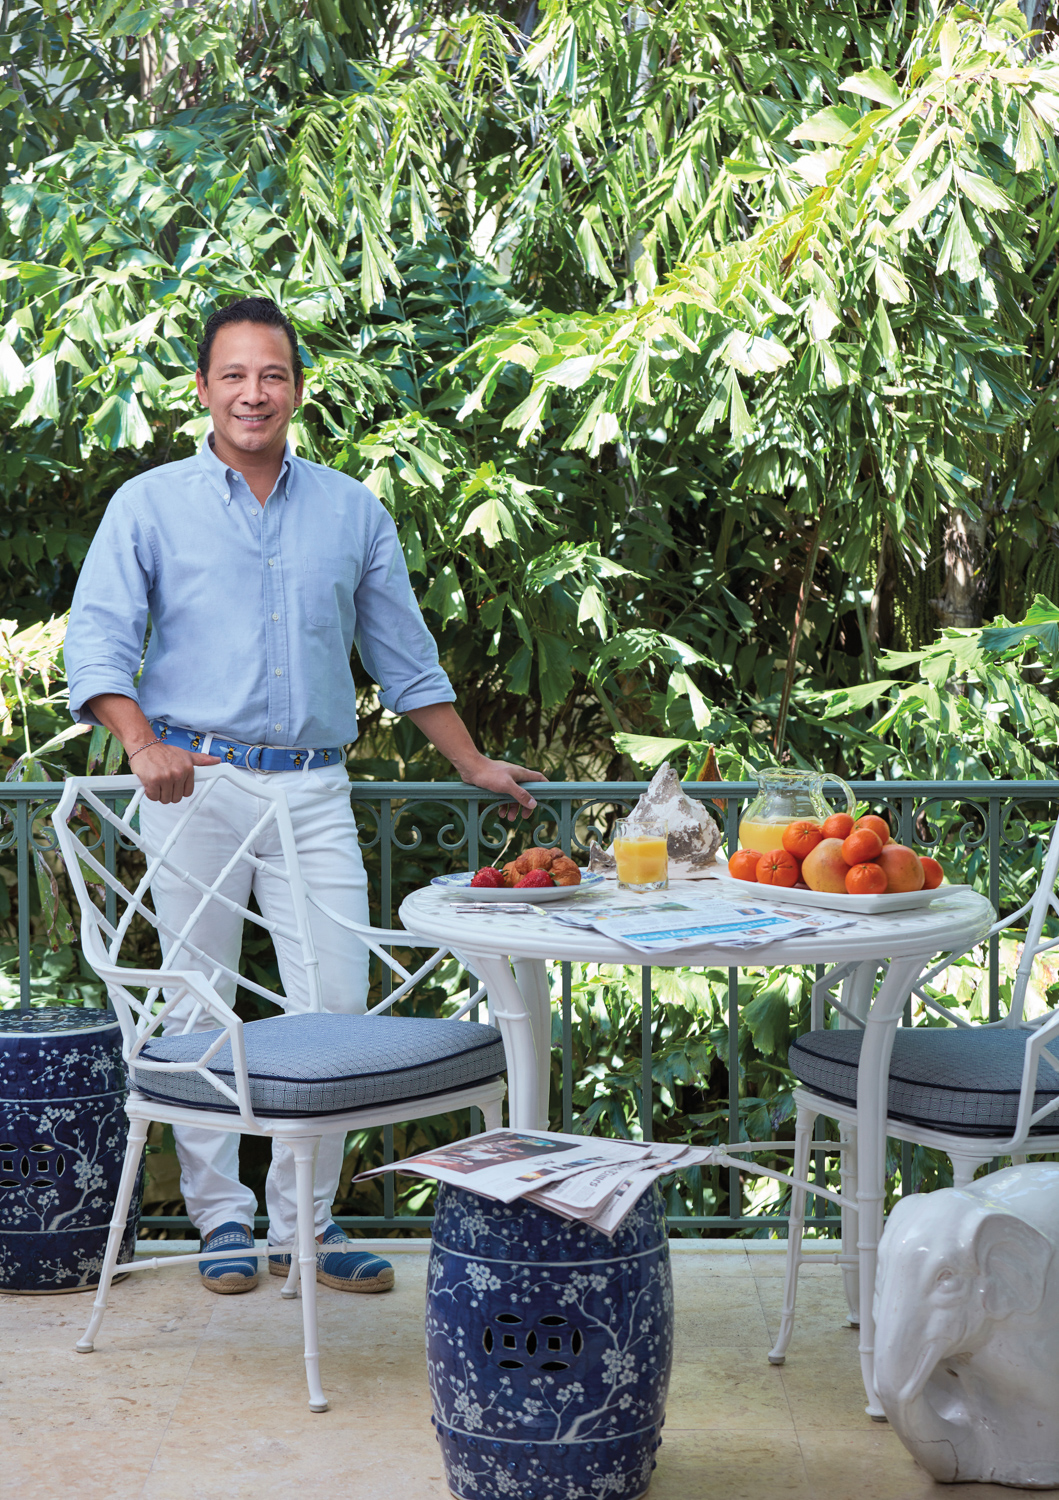 Landscape designer Fernando Wong poses outdoor near a garden table and chairs